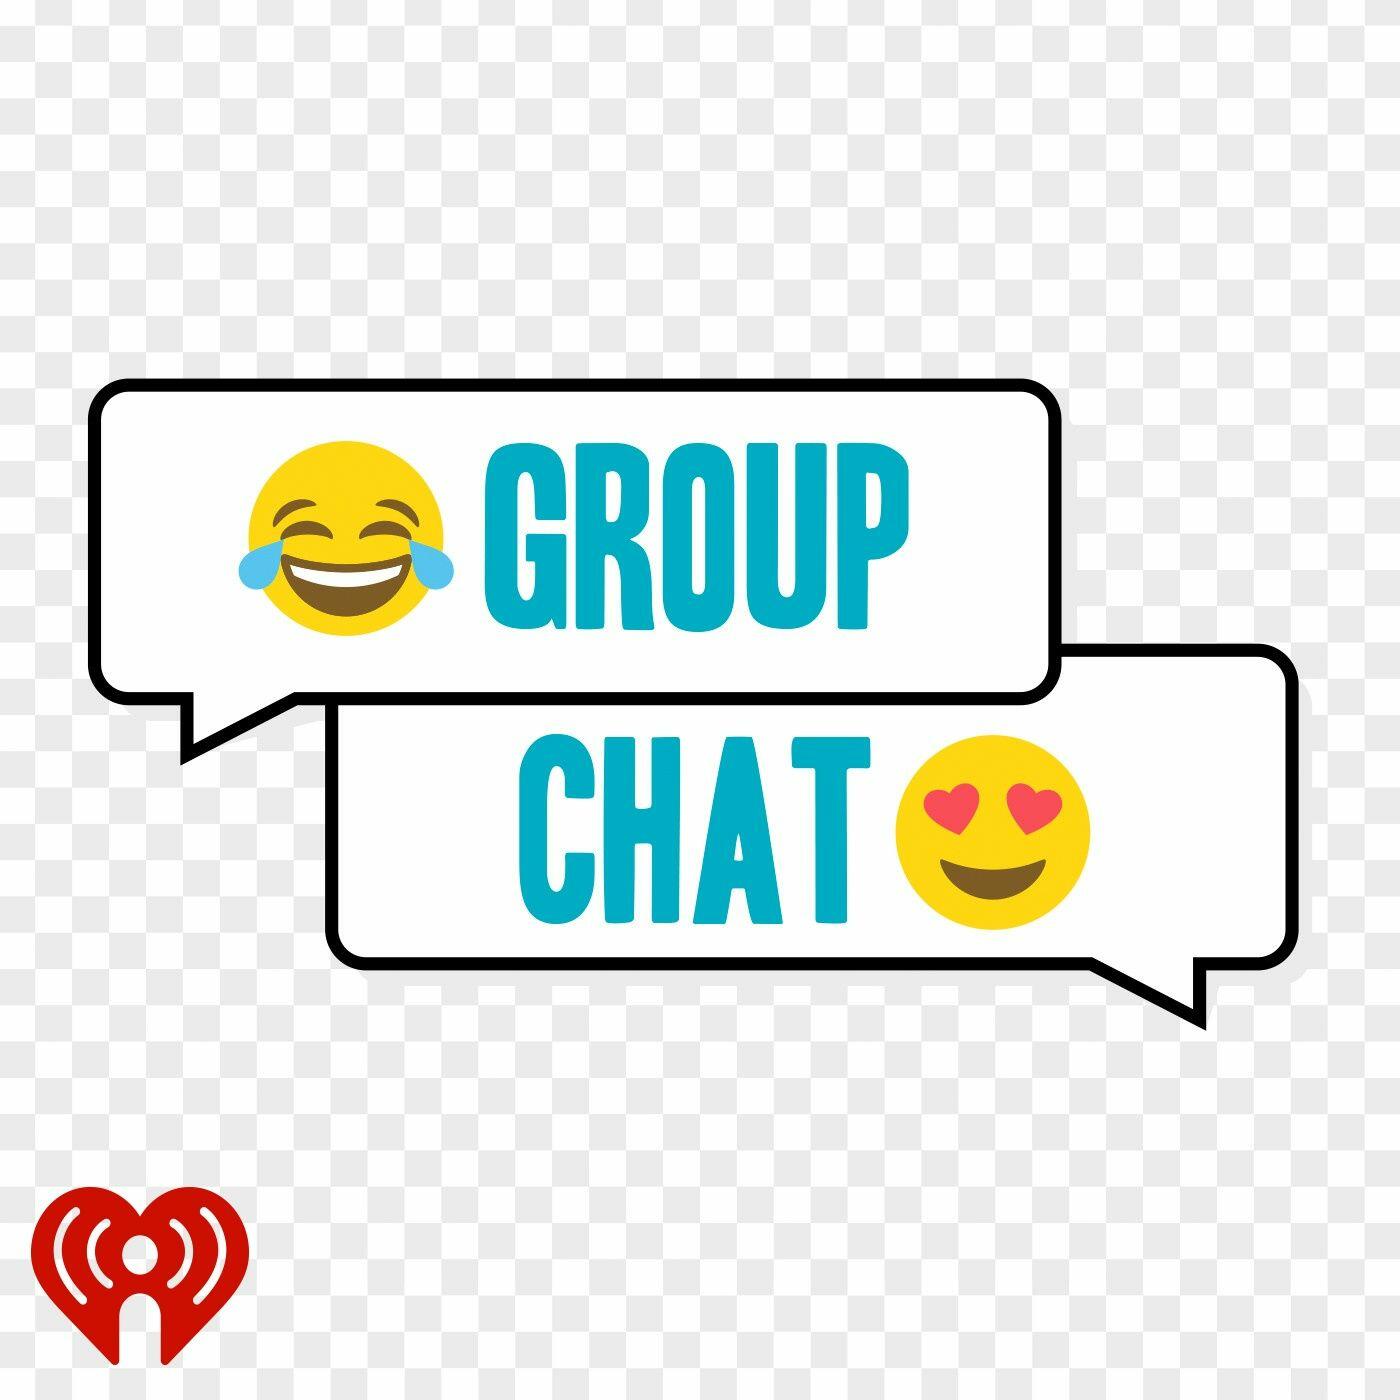 Group chat. The Group chat Podcast. Радио чат картинка. Радио чат.